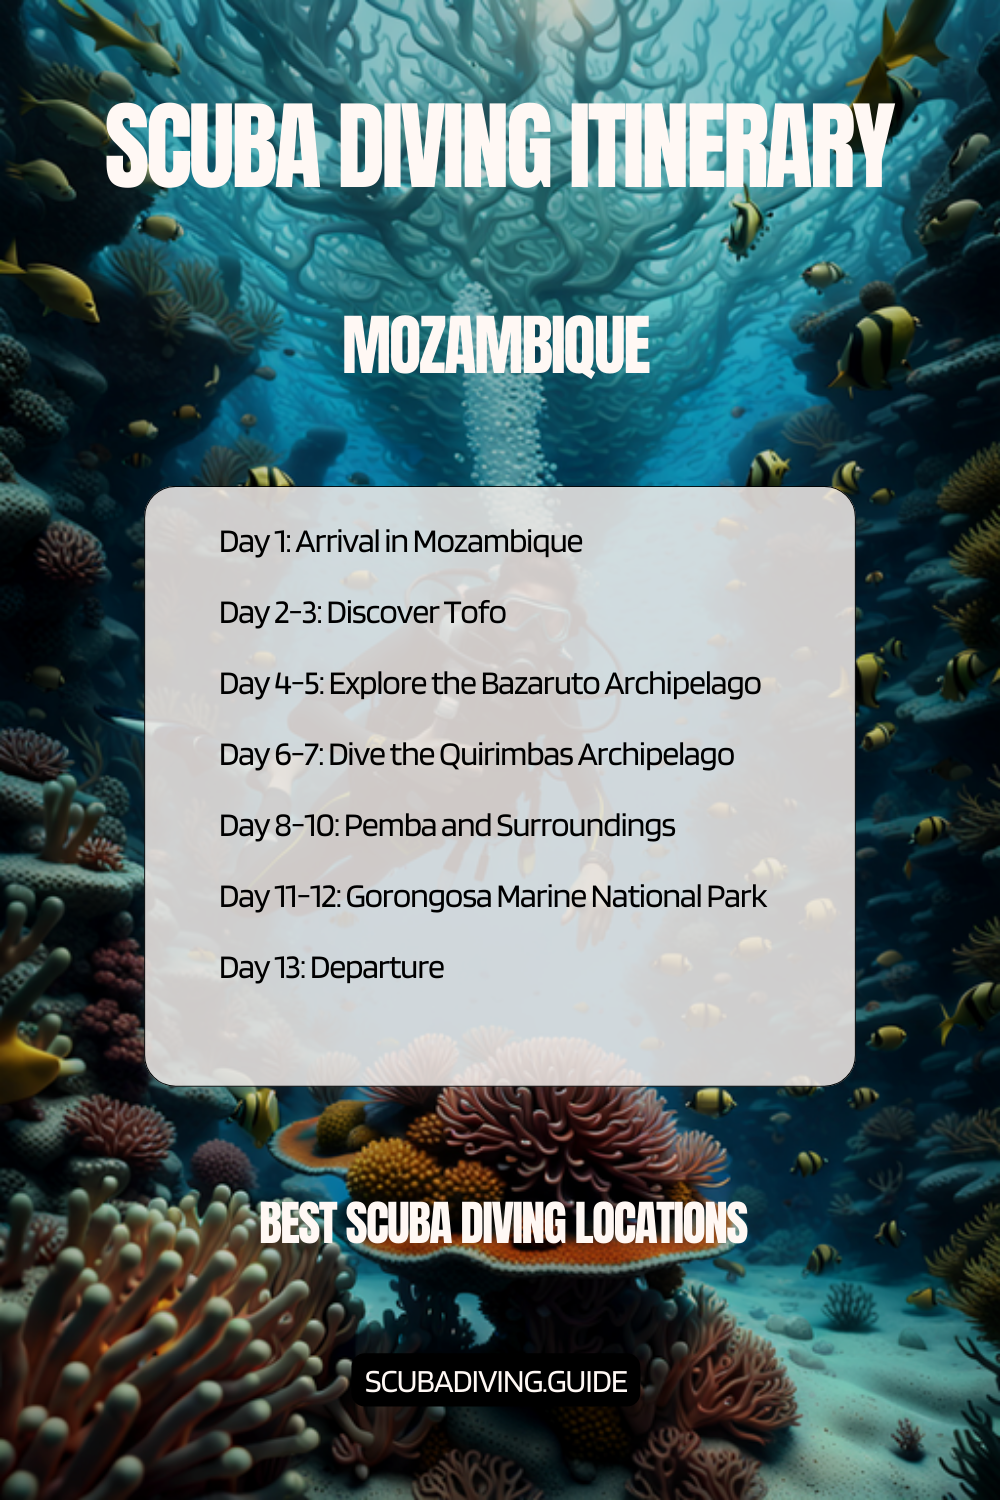 Mozambique Recommended Scuba Diving Itinerary